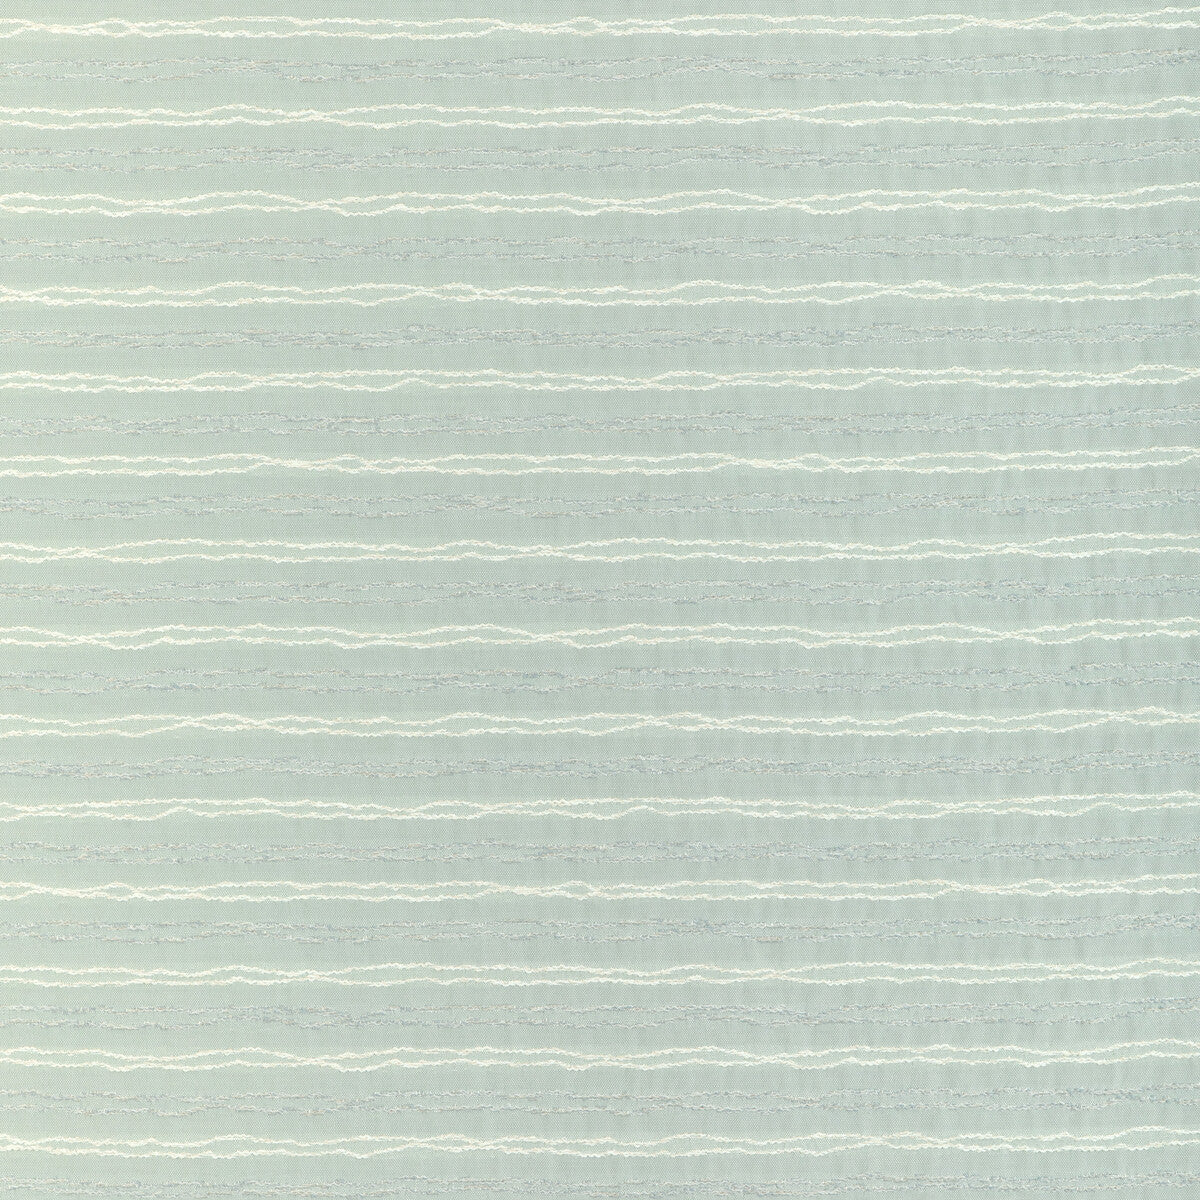 Wave Length fabric in spray color - pattern 37057.13.0 - by Kravet Design in the Thom Filicia Latitude collection